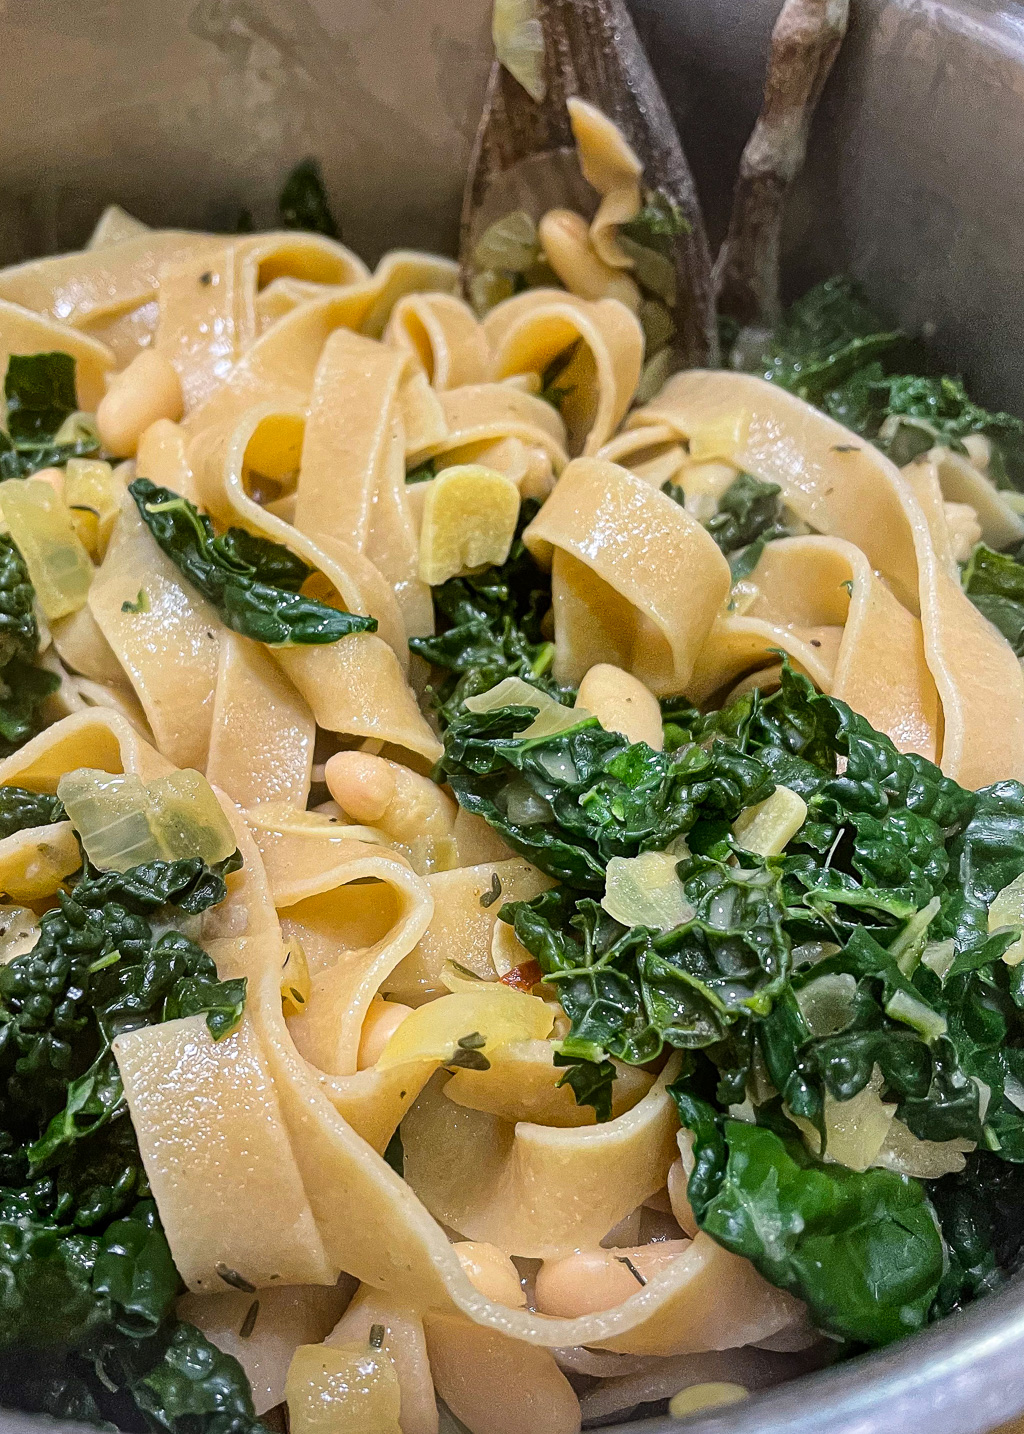 alt="a close up of some white beans and kale pasta."